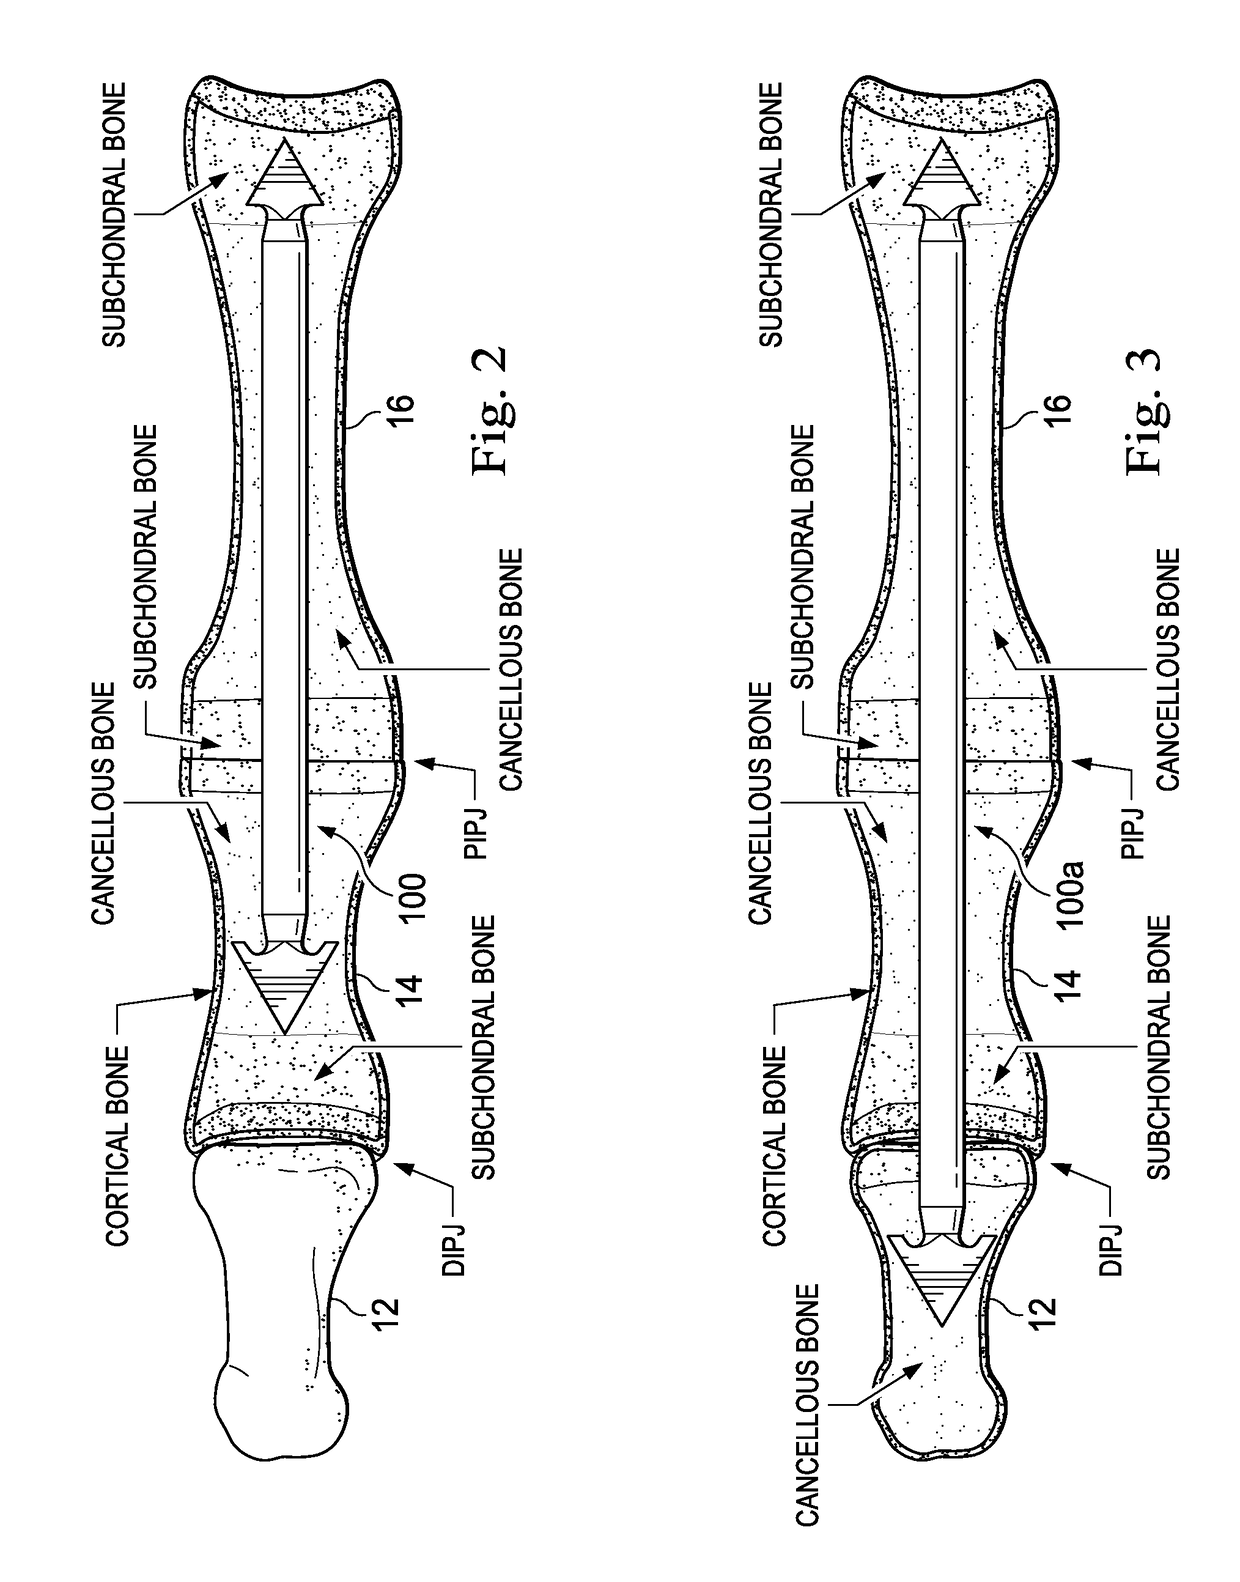 Methods and implants for treating hammertoe and other deformities